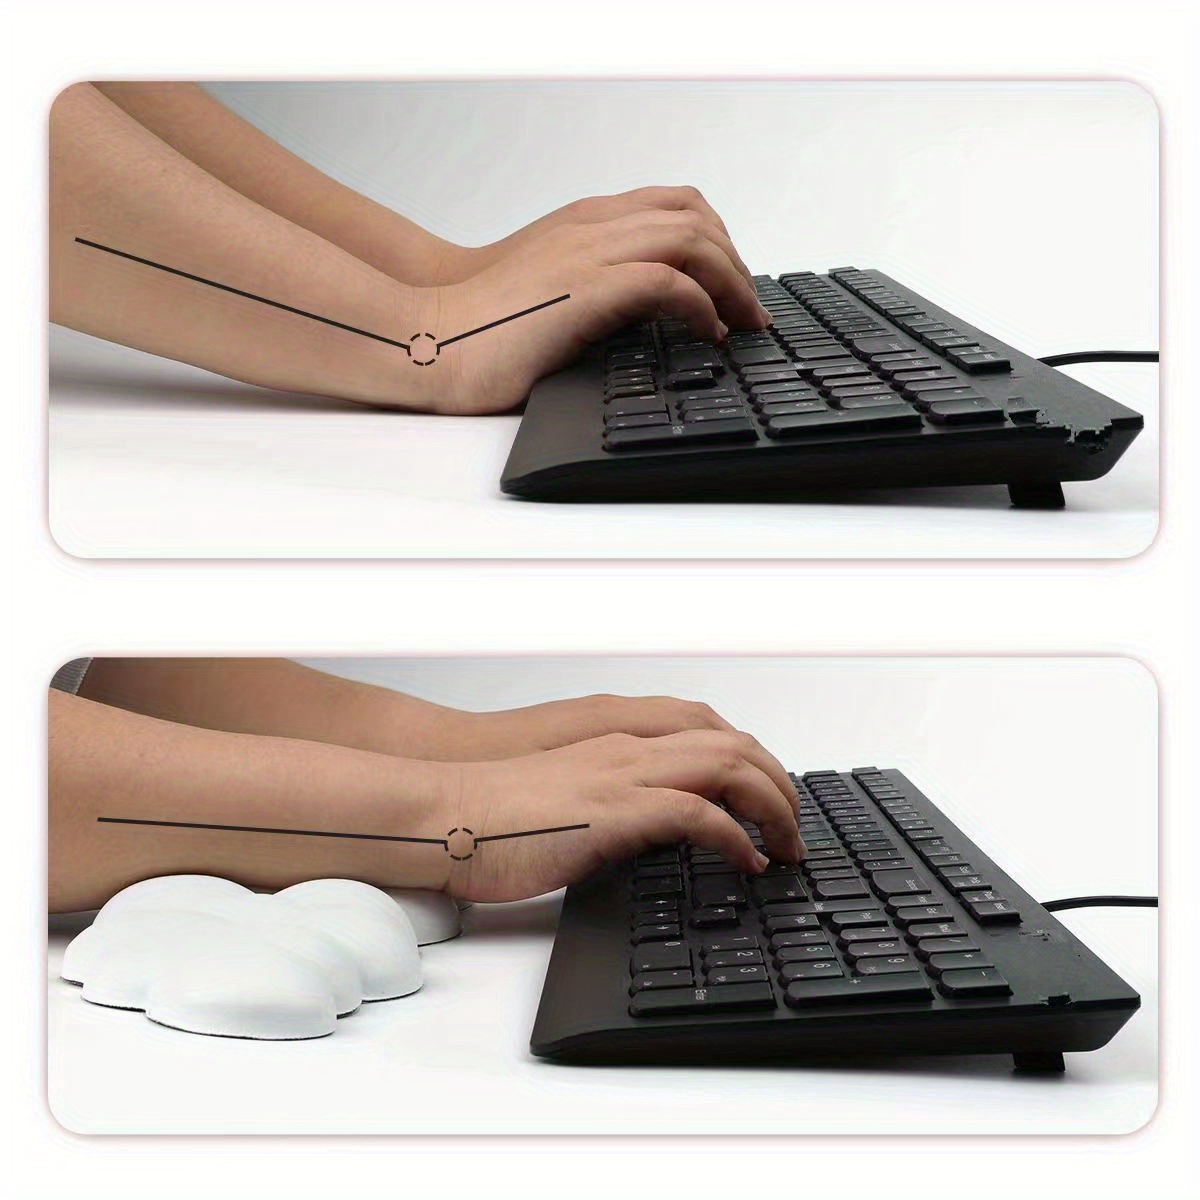 Ergonomic Mouse Pad with Wrist Support, Comfortable Keyboard Wrist Rest, Memory  Foam Wrist Pad for Keyboard, Mouse Pad Sets for Easy Typing & Pain Relief  for Computer, Office & Home, Black 